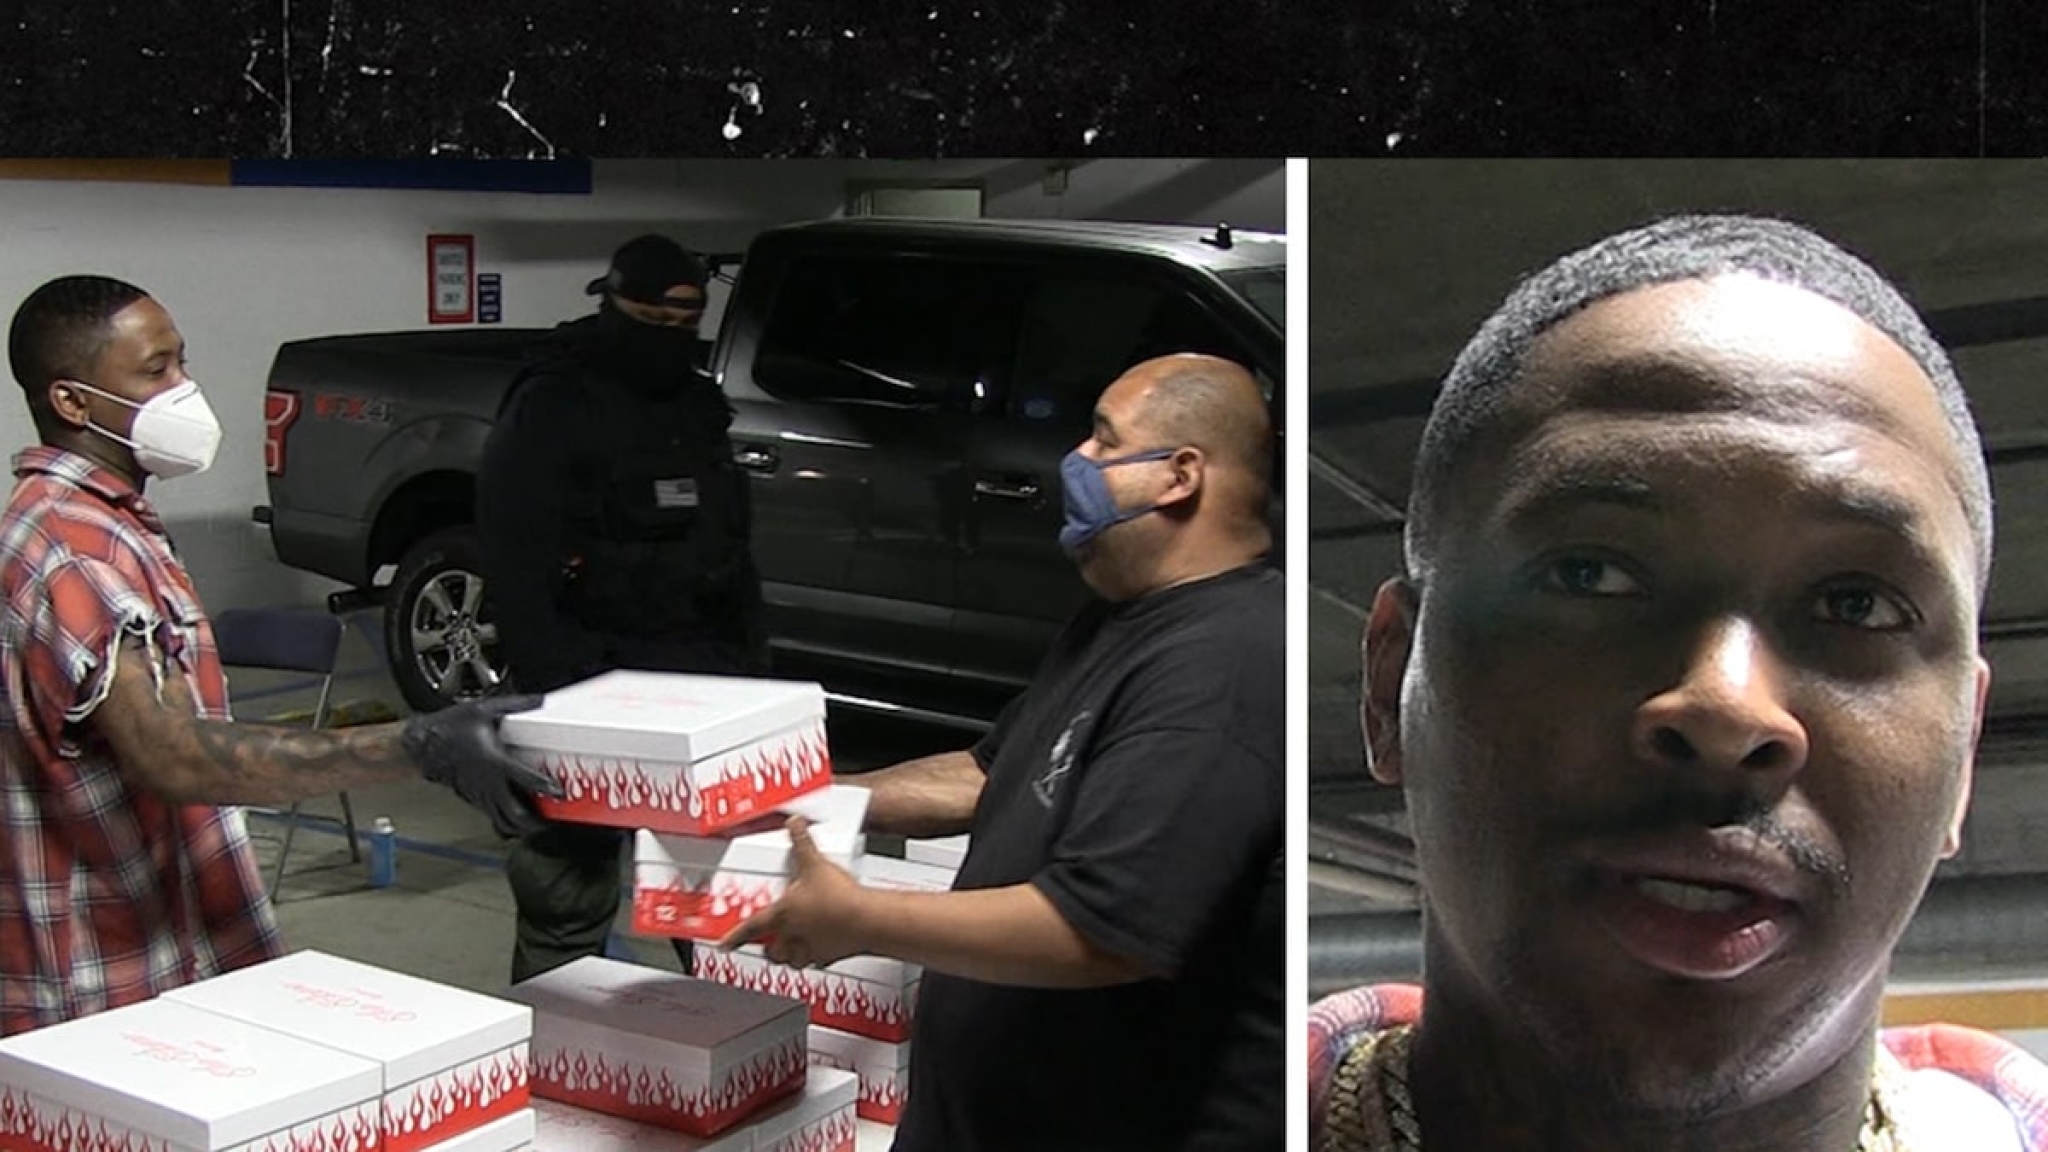 YG Giving Away His $200 Sneakers to Homeless on Skid Row